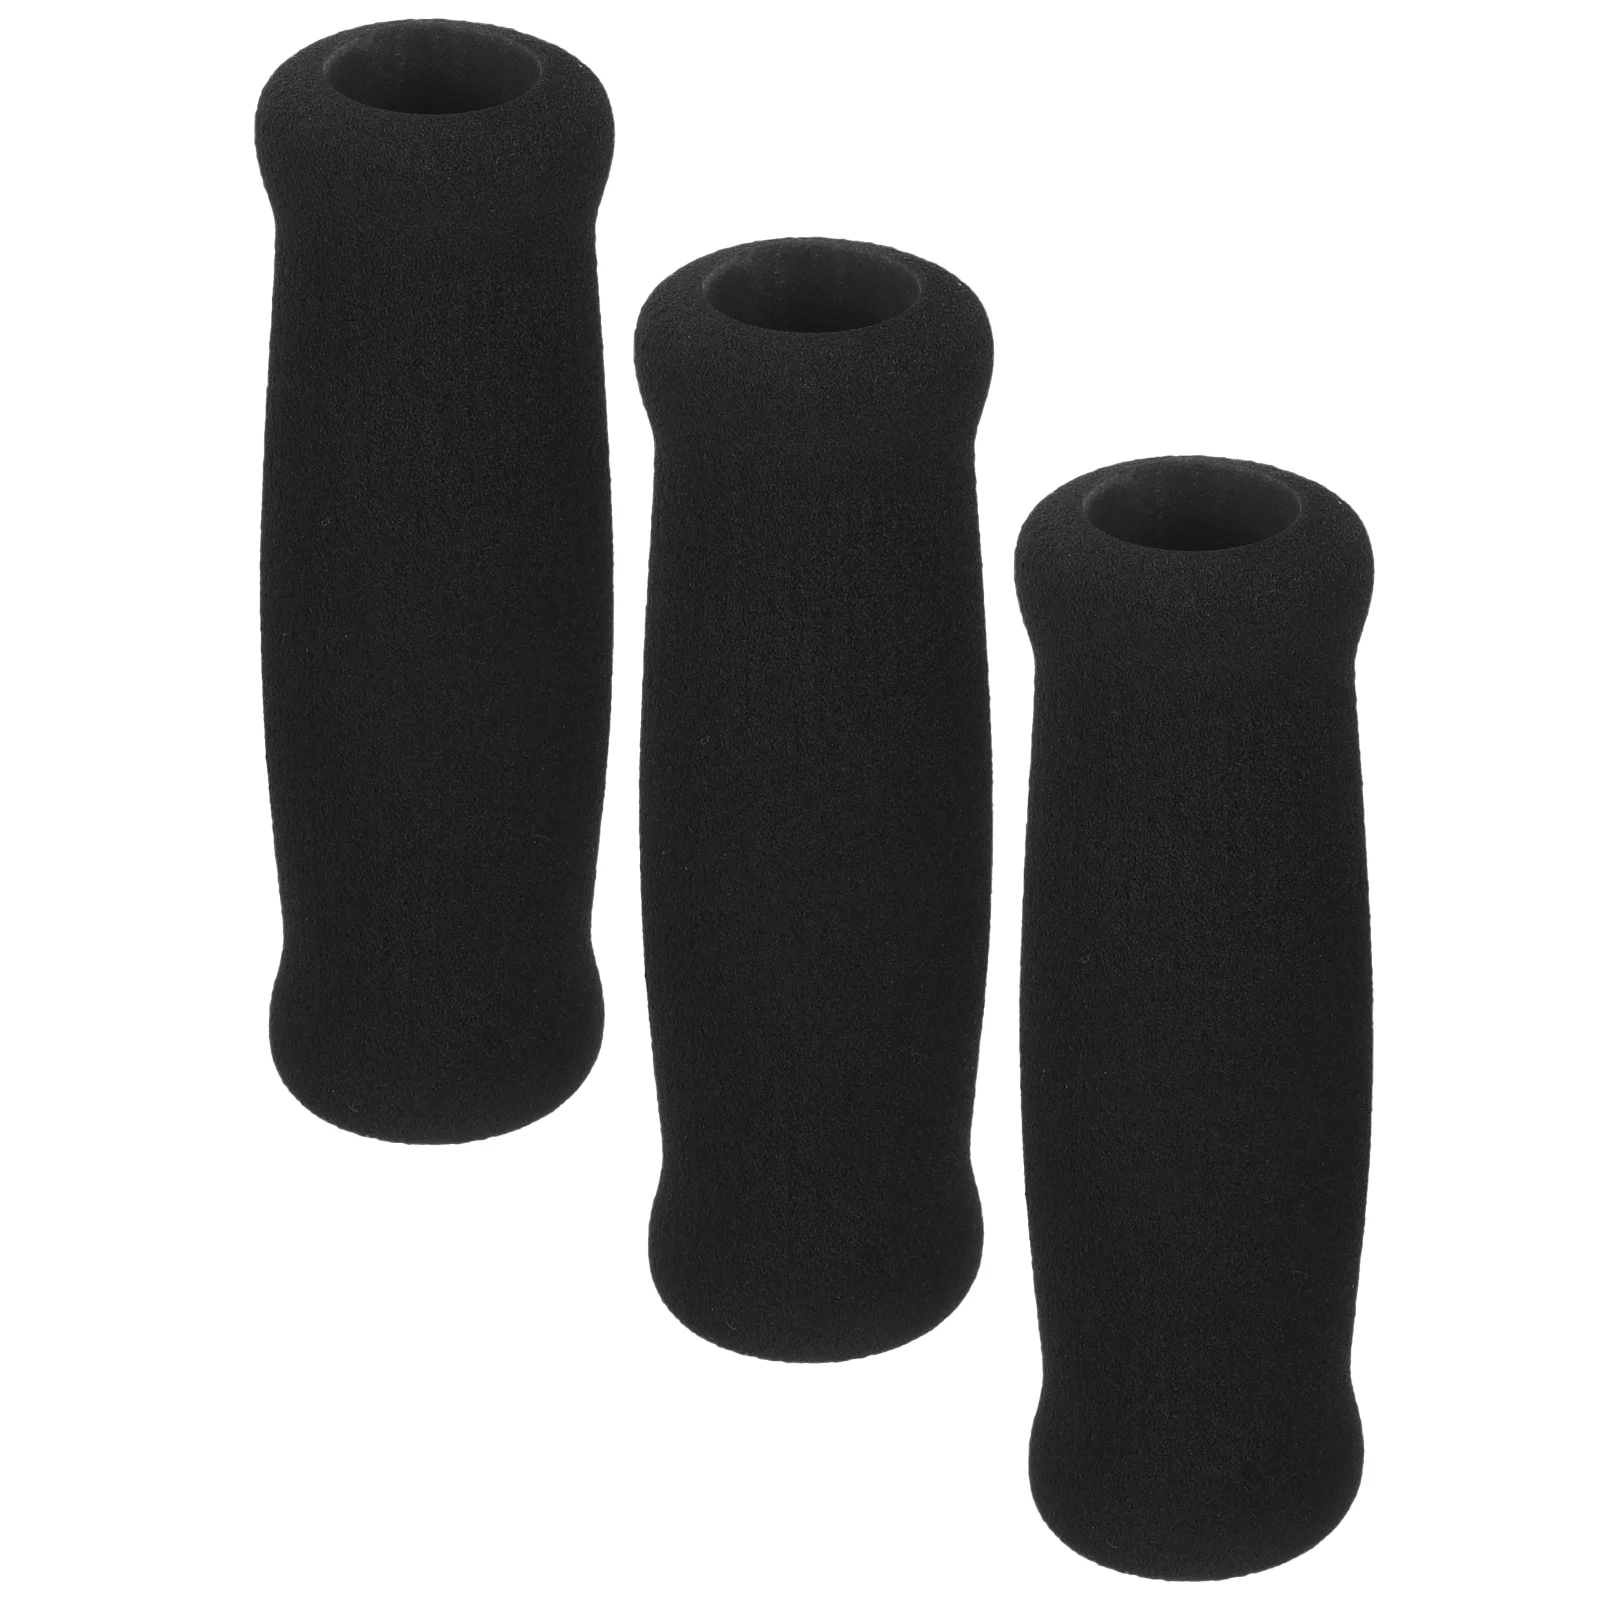 Cane Grip Replacement Cane Handle Grip Replacement Cane Wraps Walking Cane Hand Grip Foam Handle Cane Bicycle Handlebars